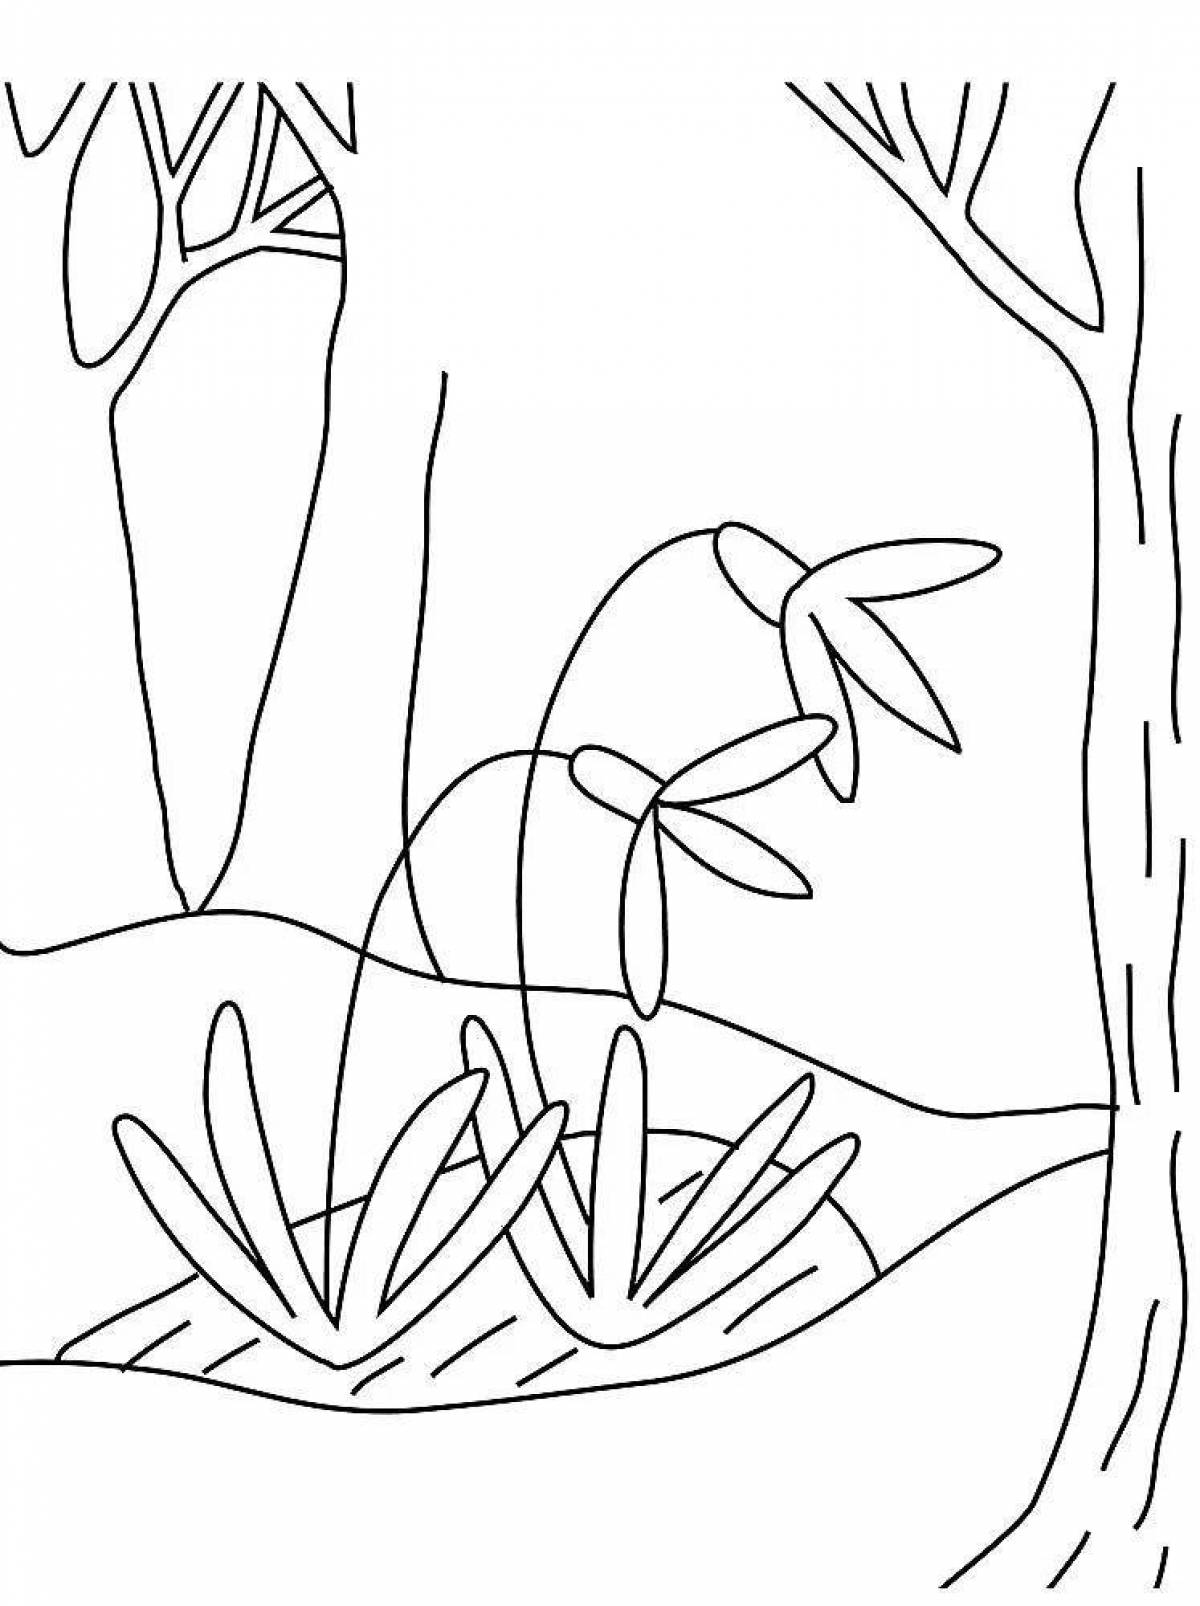 Exciting snowdrops coloring pages for kids